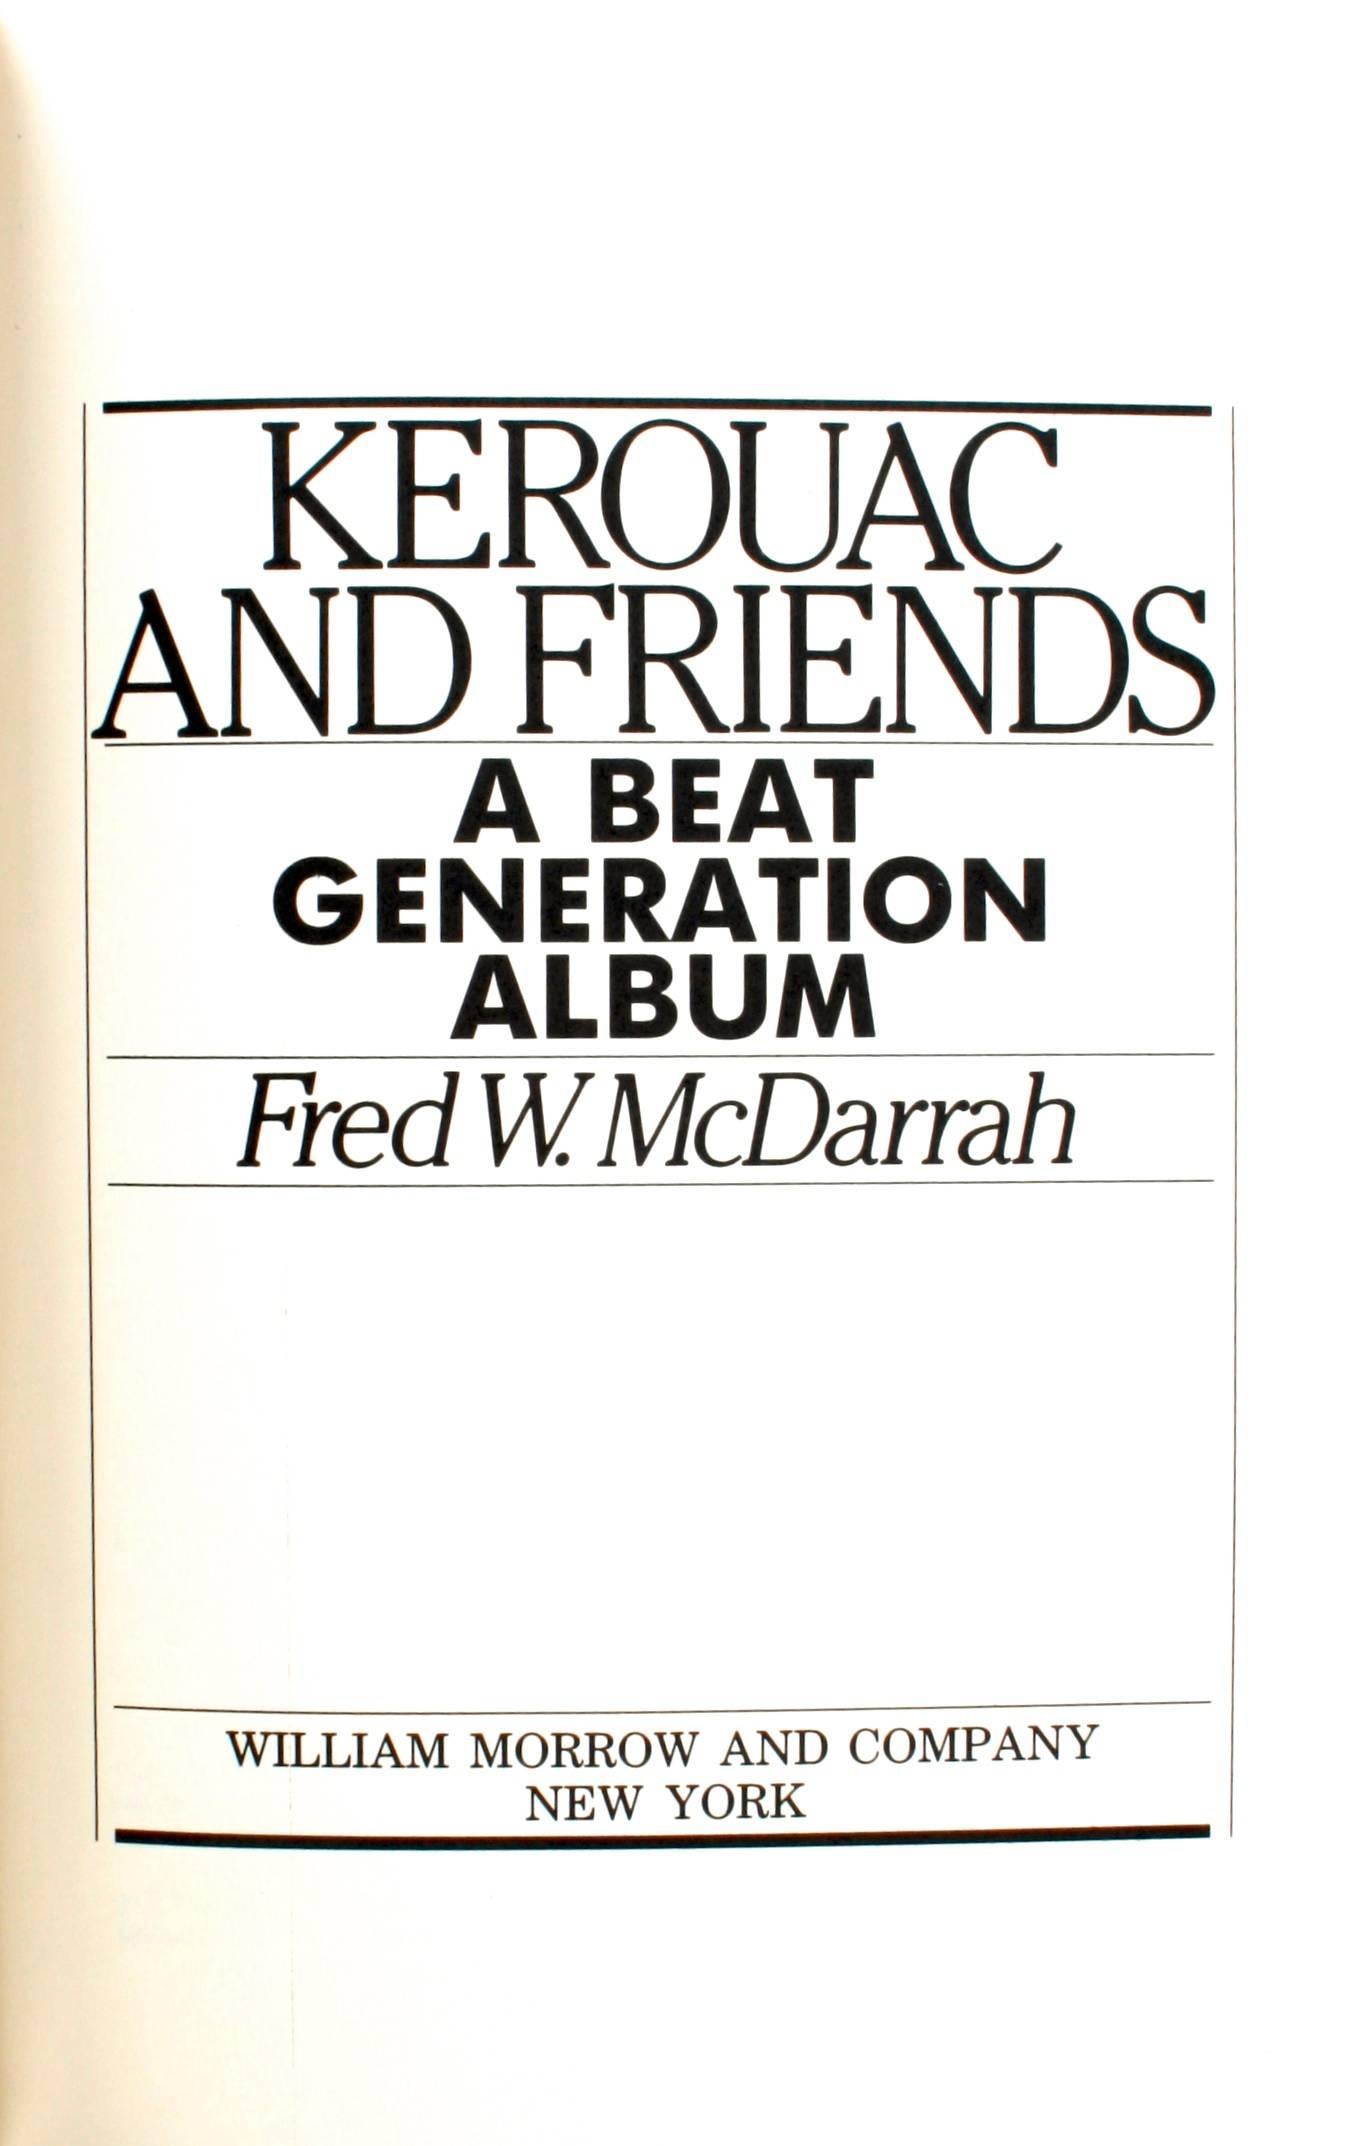 Kerouac and Friends: A Beat Generation Album by Fred W. McDarrah. William Morrow & Company, New York, 1985. Stated first edition hardcover with dust jacket. 338 pages. Renowned photographer Fred McDarrah captures the 